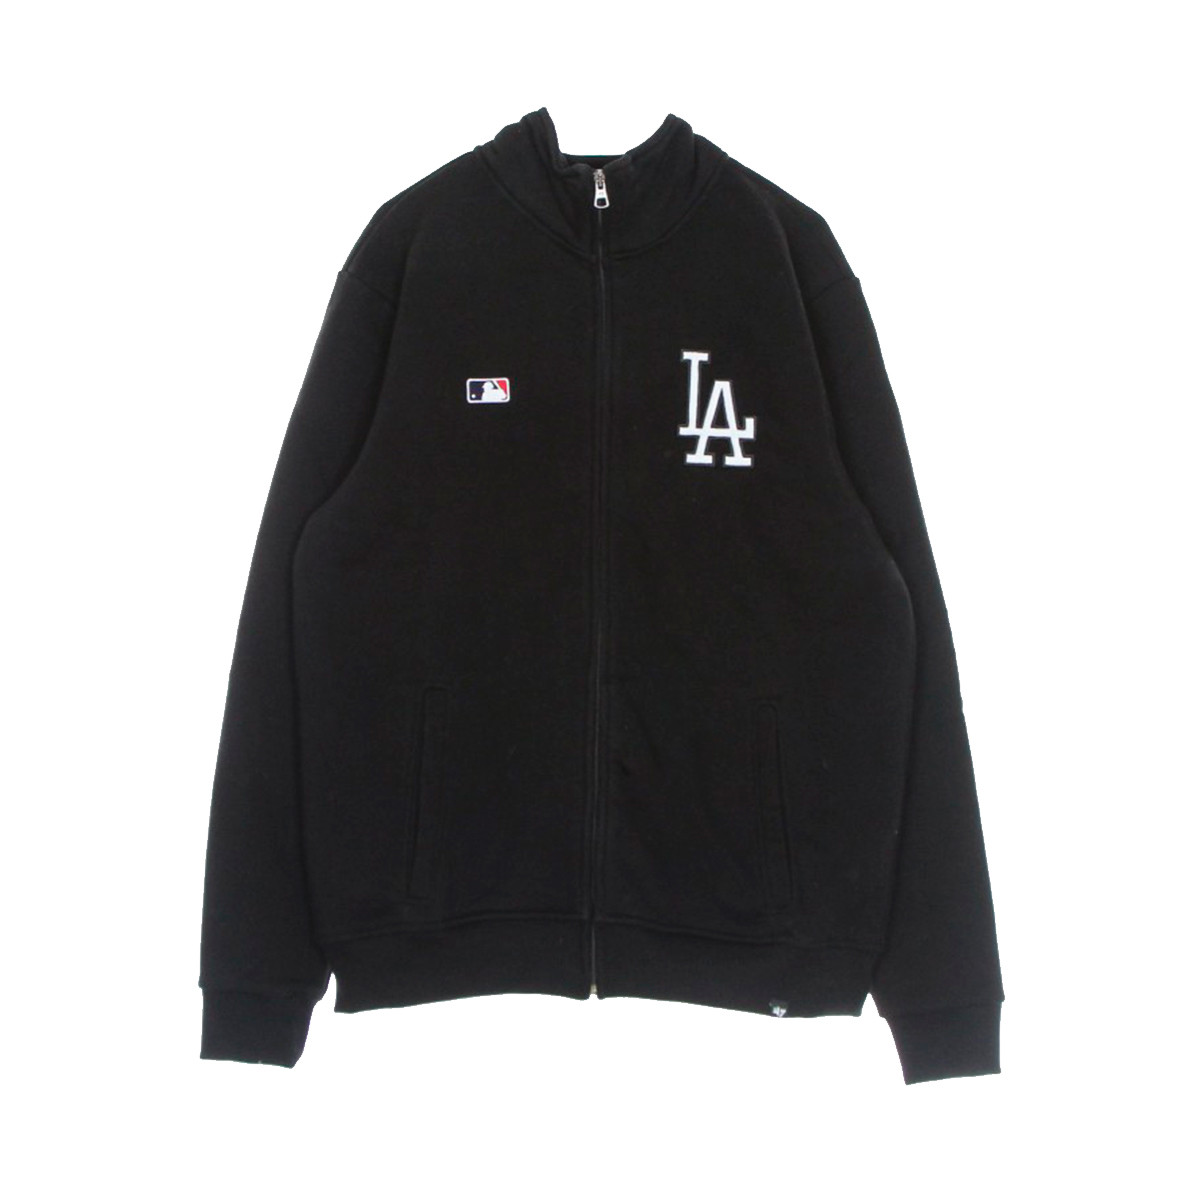 Official Ladies Los Angeles Dodgers Jackets, Dodgers Ladies Pullovers,  Track Jackets, Coats